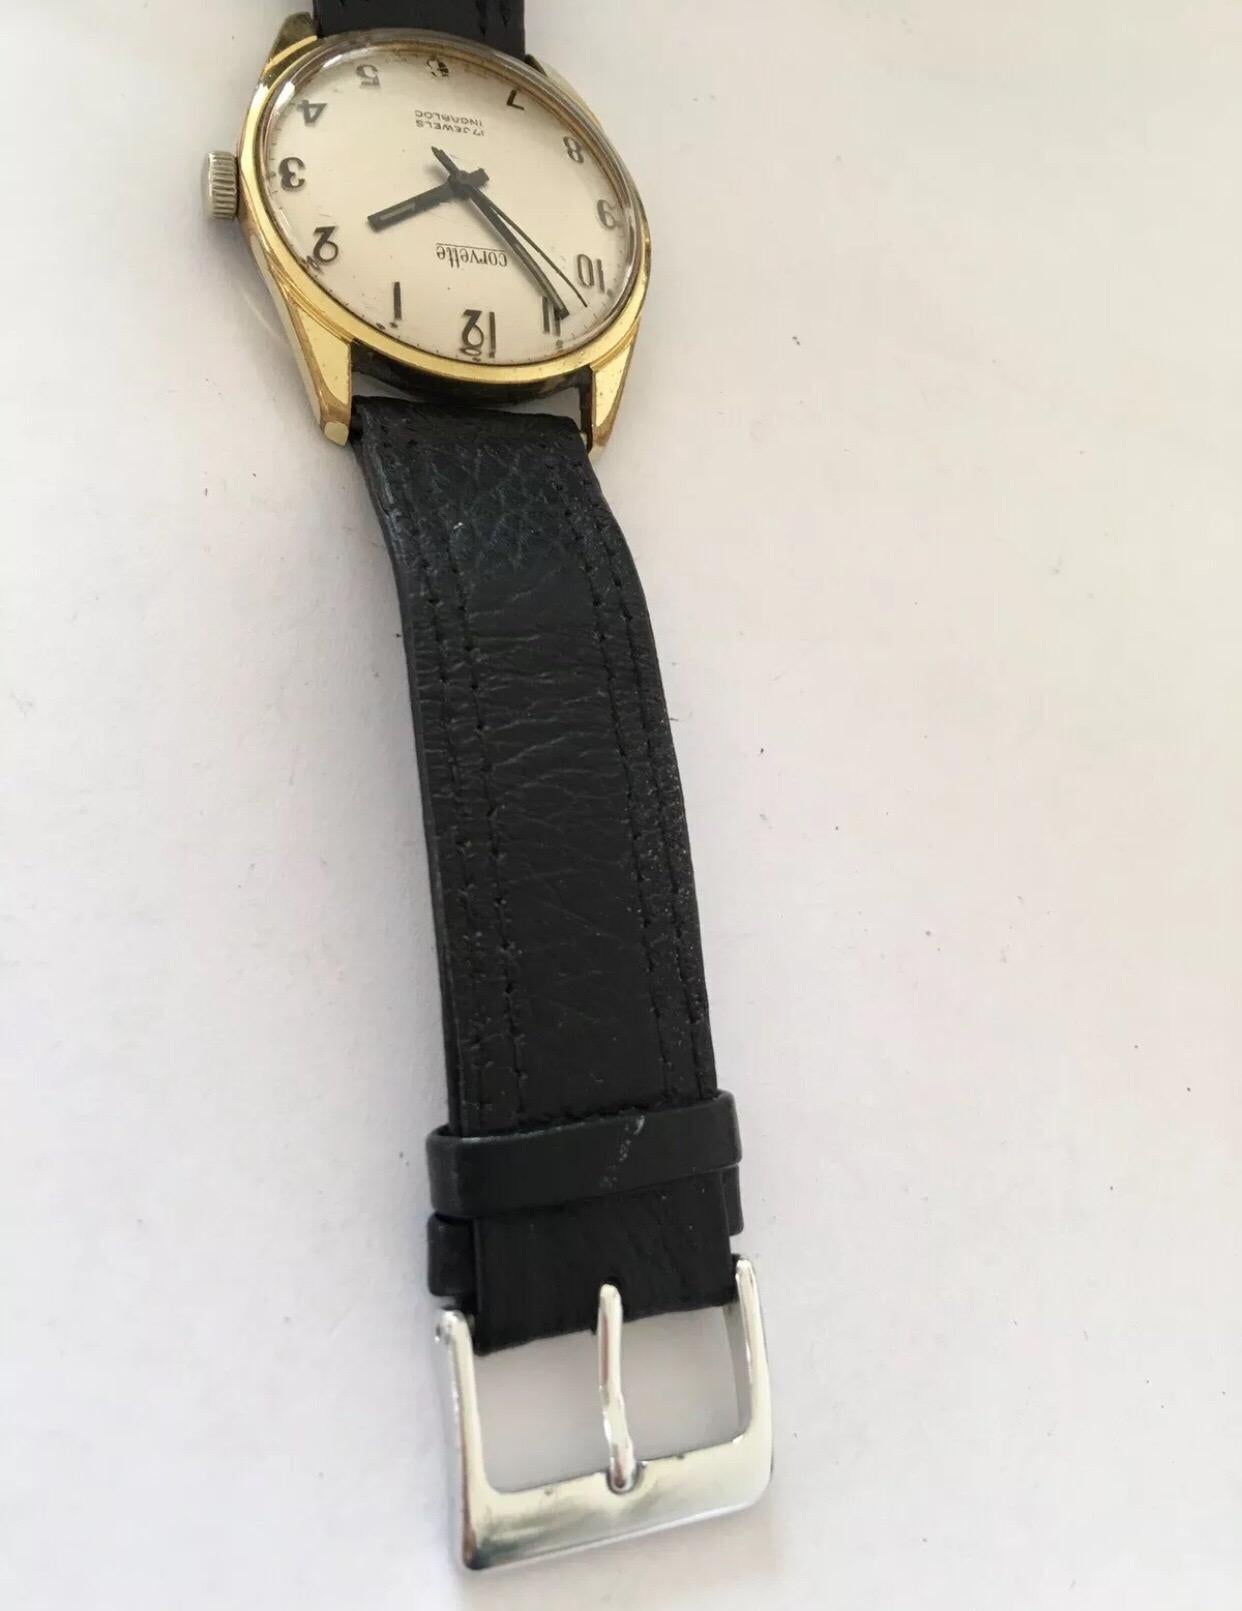 Vintage Gold-Plated Stainless Steel Swiss Made Corvette Hand-Winding Wristwatch 3